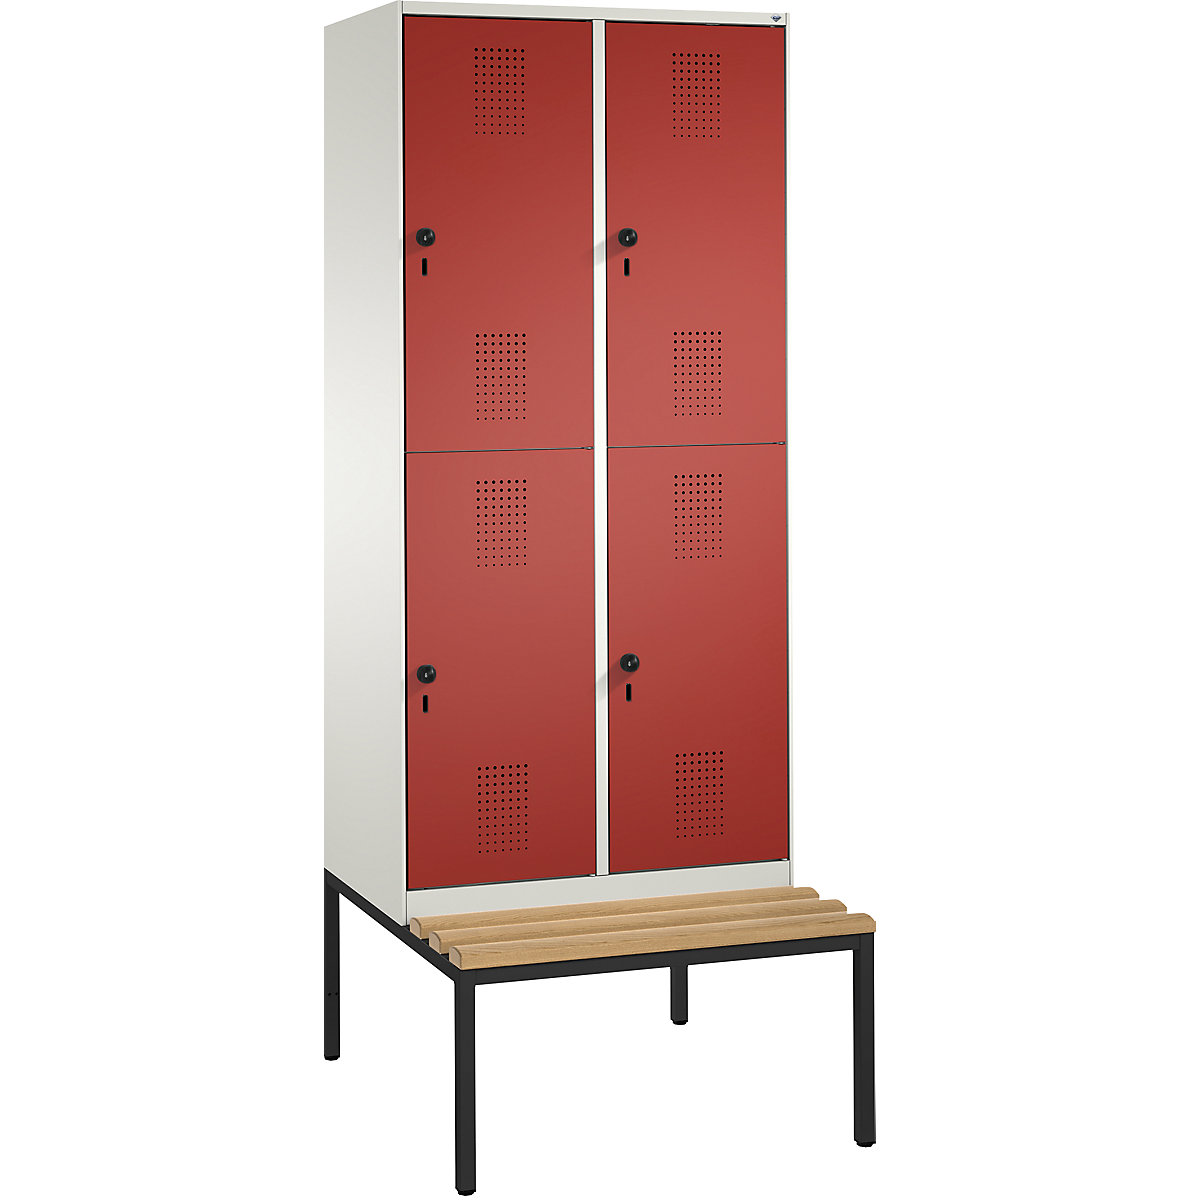 EVOLO cloakroom locker, double tier, with bench – C+P, 2 compartments, 2 shelf compartments each, compartment width 400 mm, pure white / flame red-15